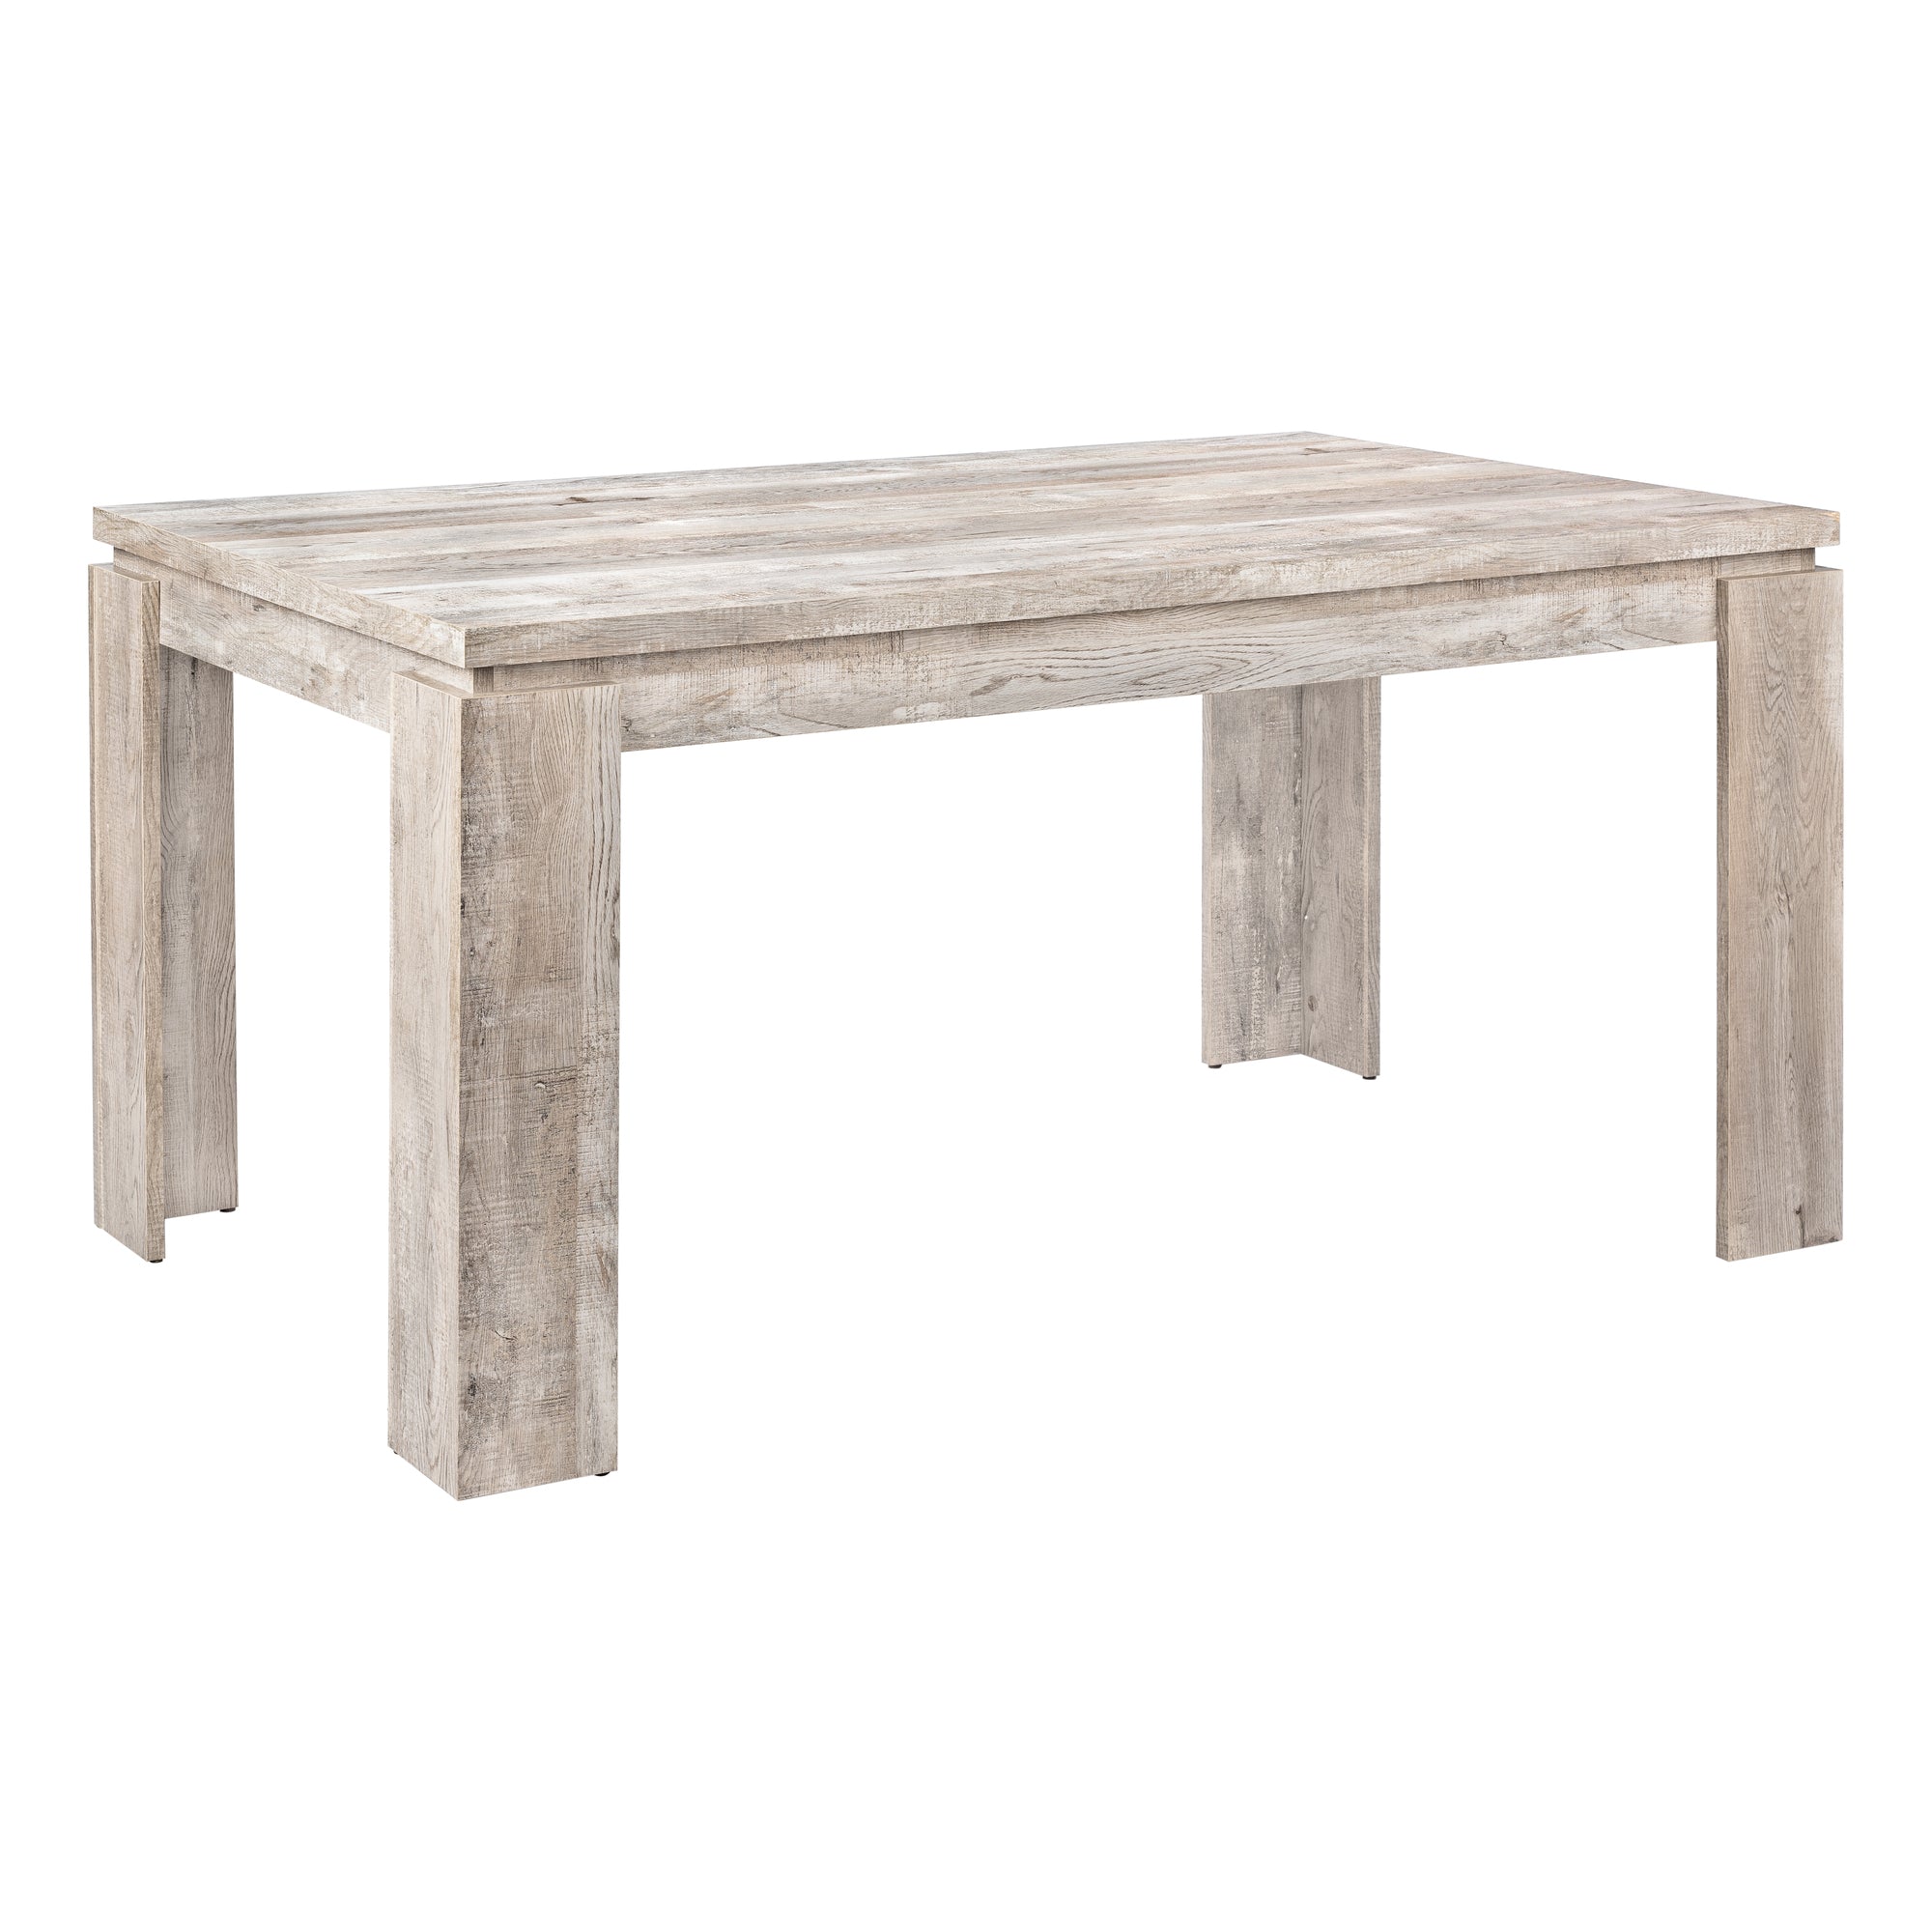 DINING TABLE - 36"X 60" / TAUPE RECLAIMED WOOD-LOOK